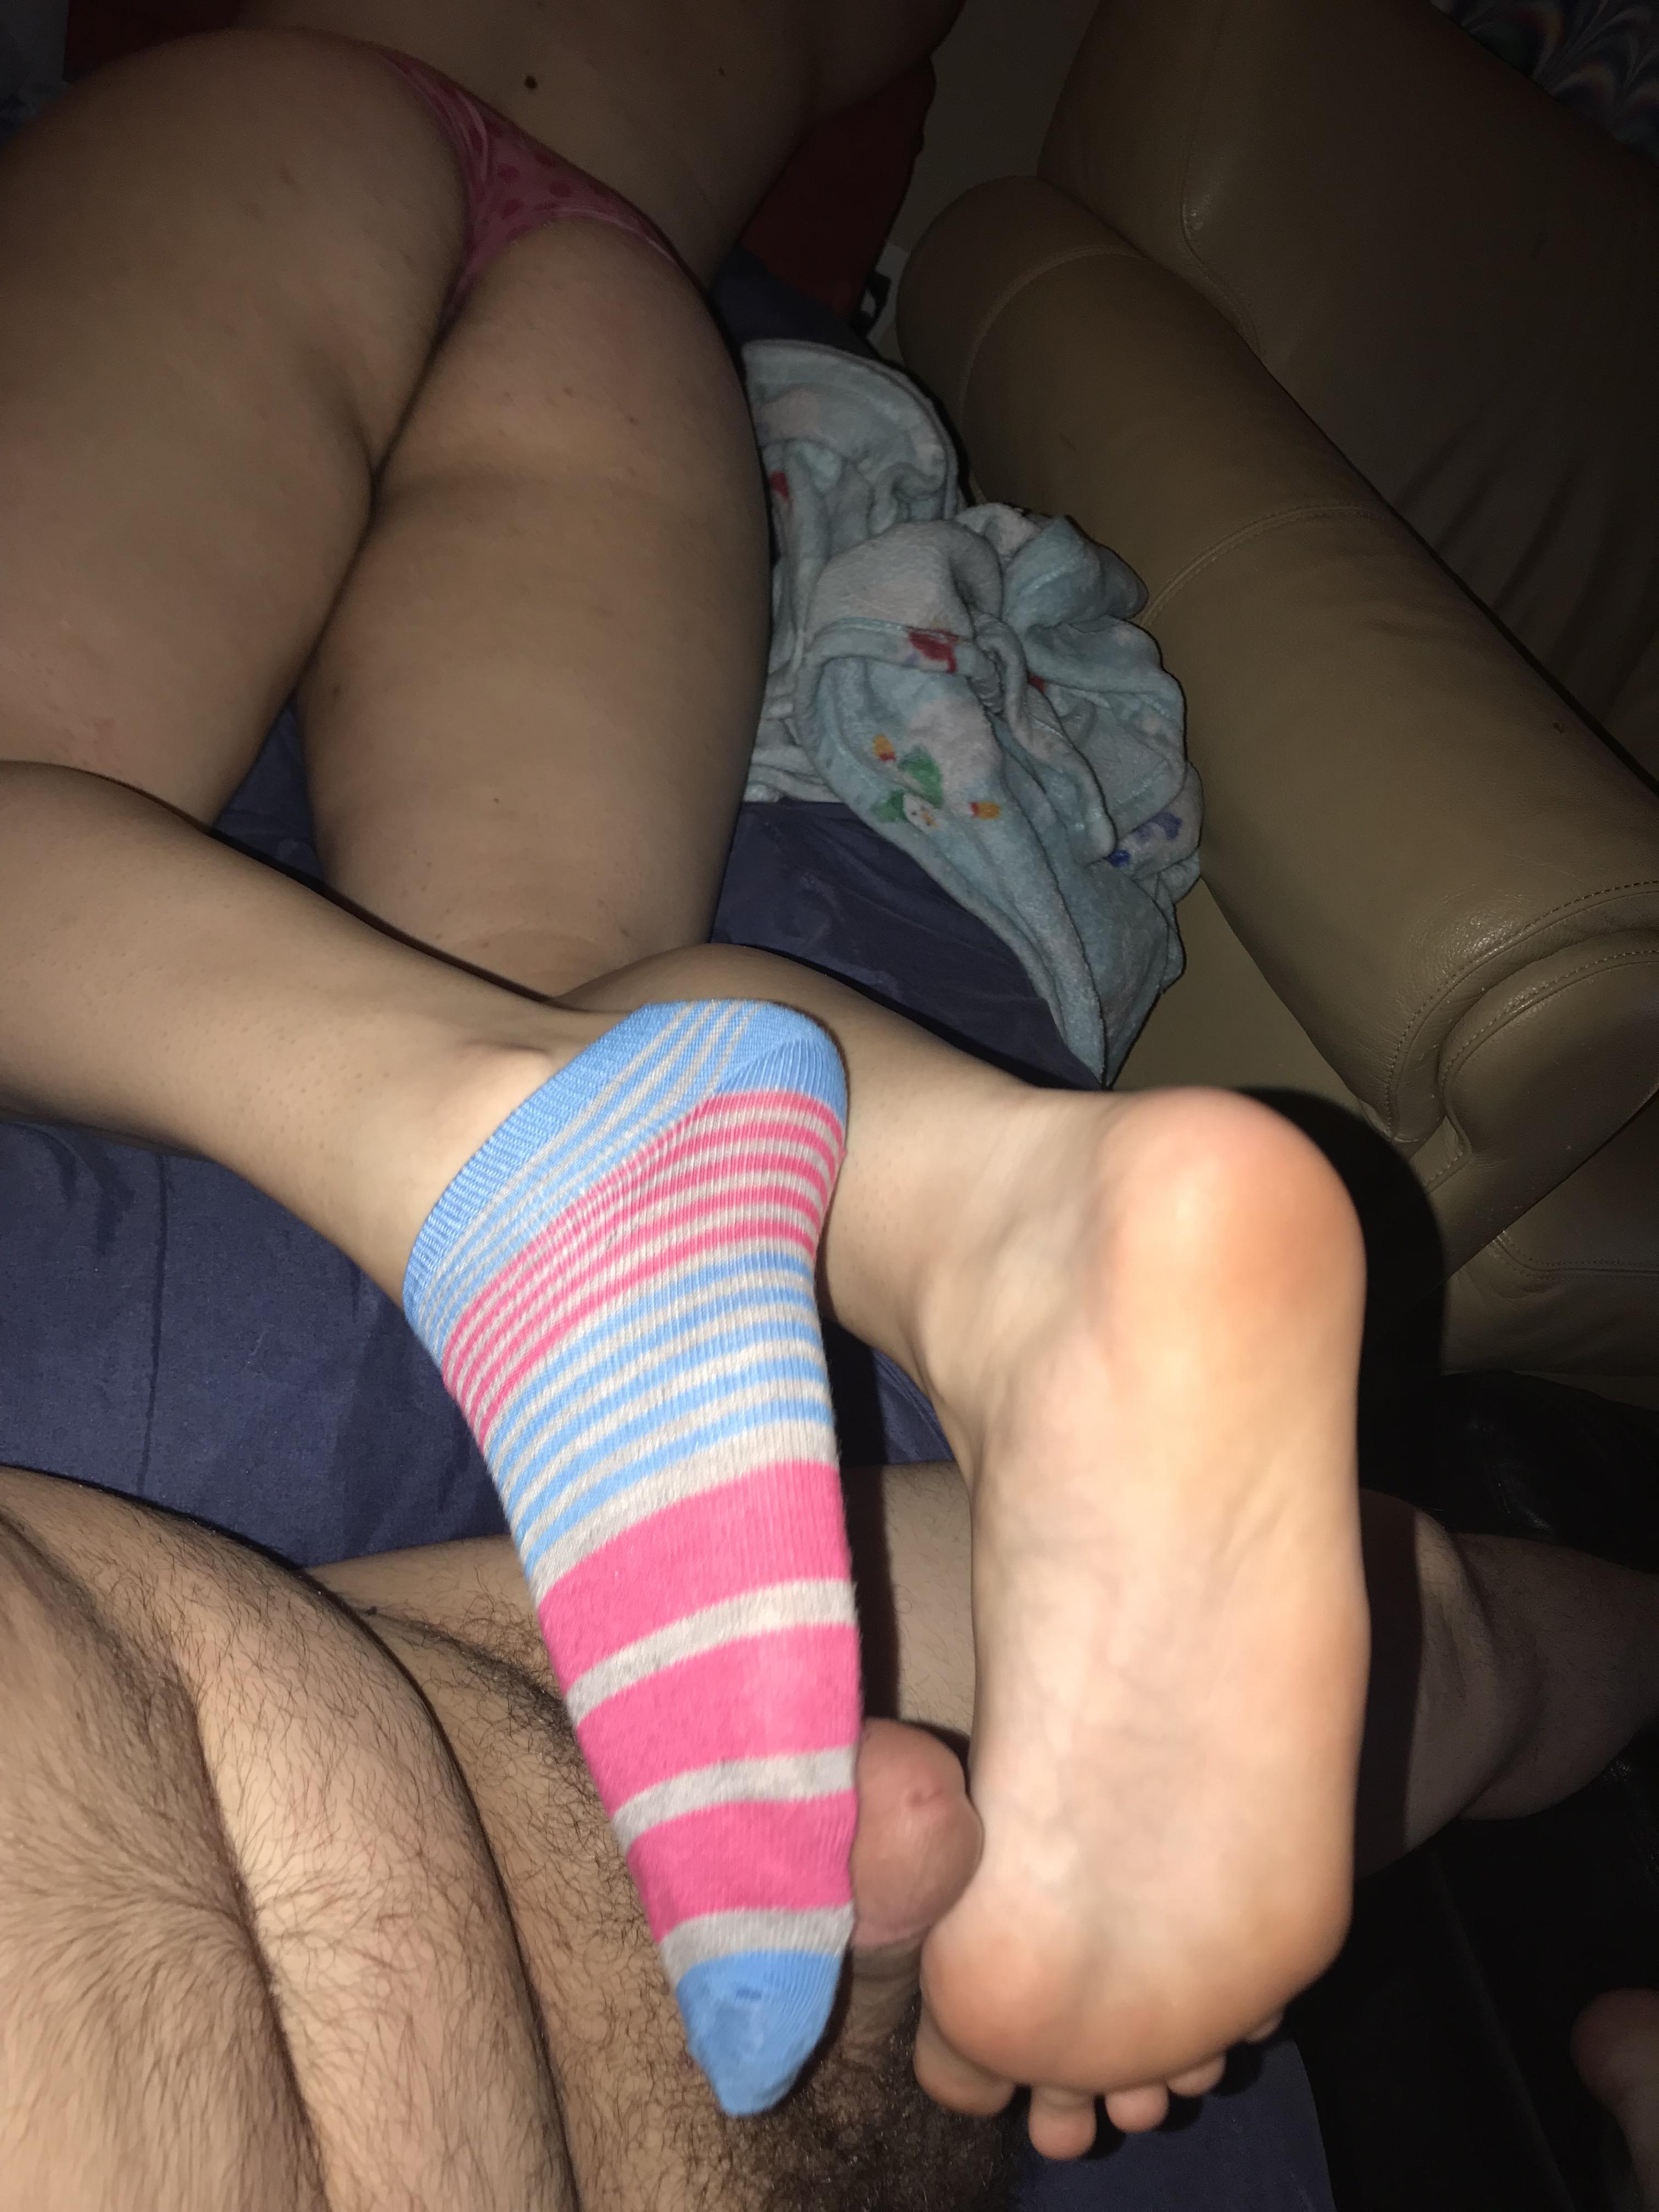 Teasing her daddy with her pillowey feet